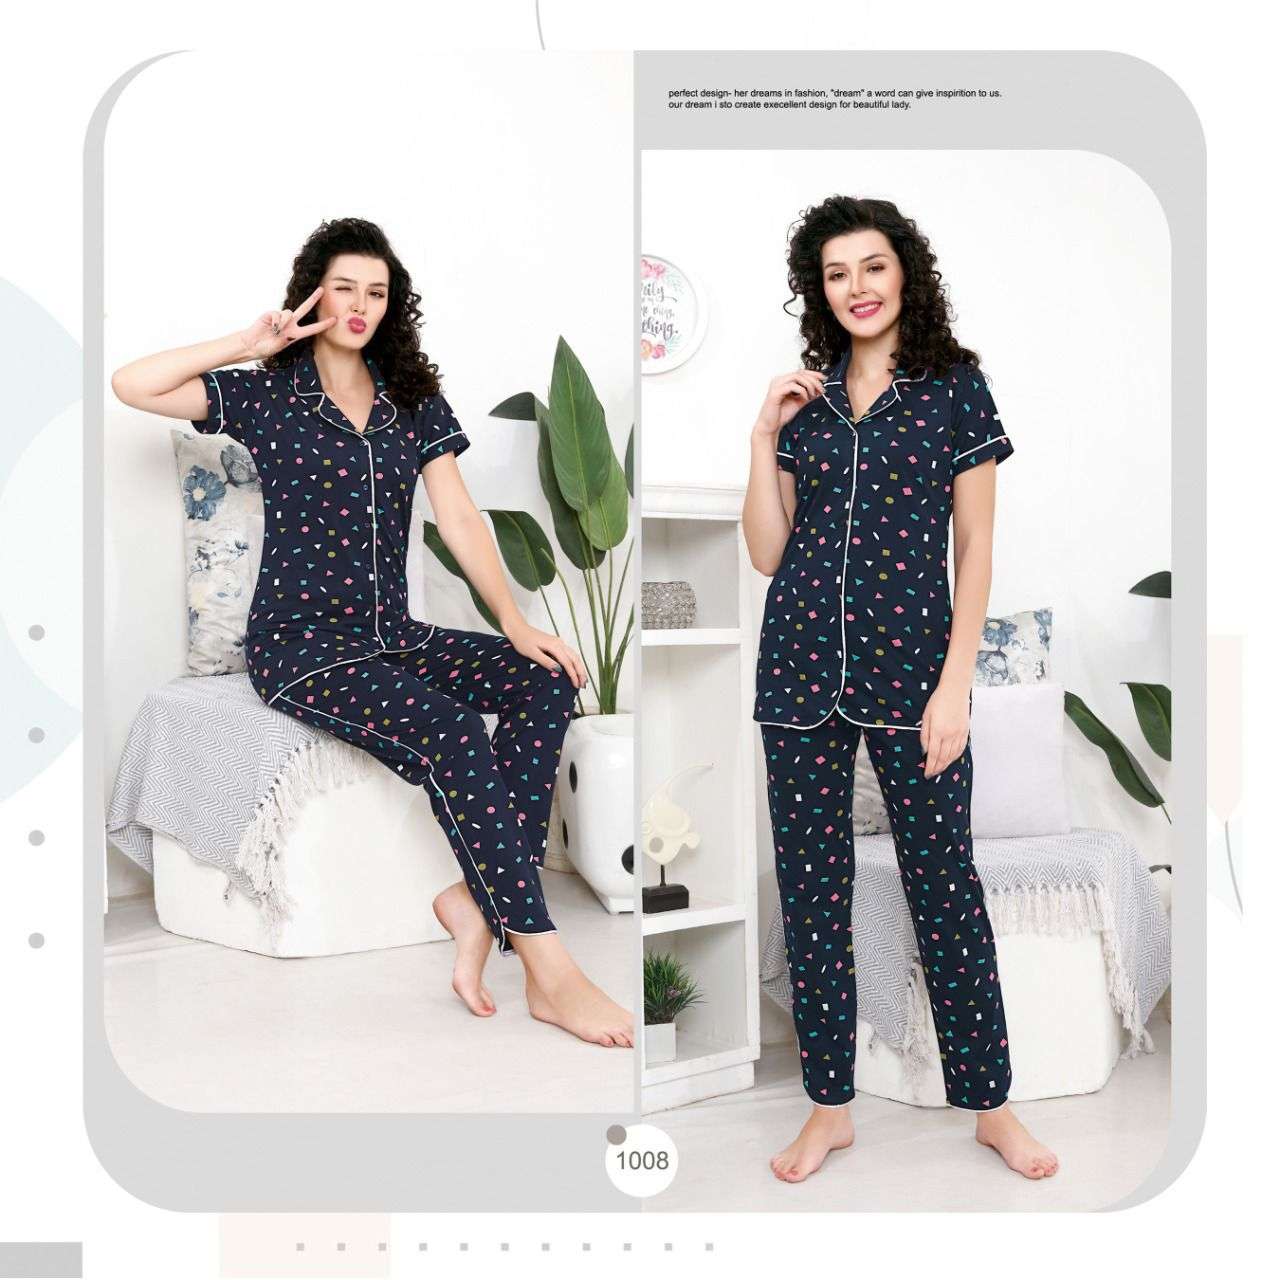 WOOGLEE Night Out Vol 2 Wholesale catalog